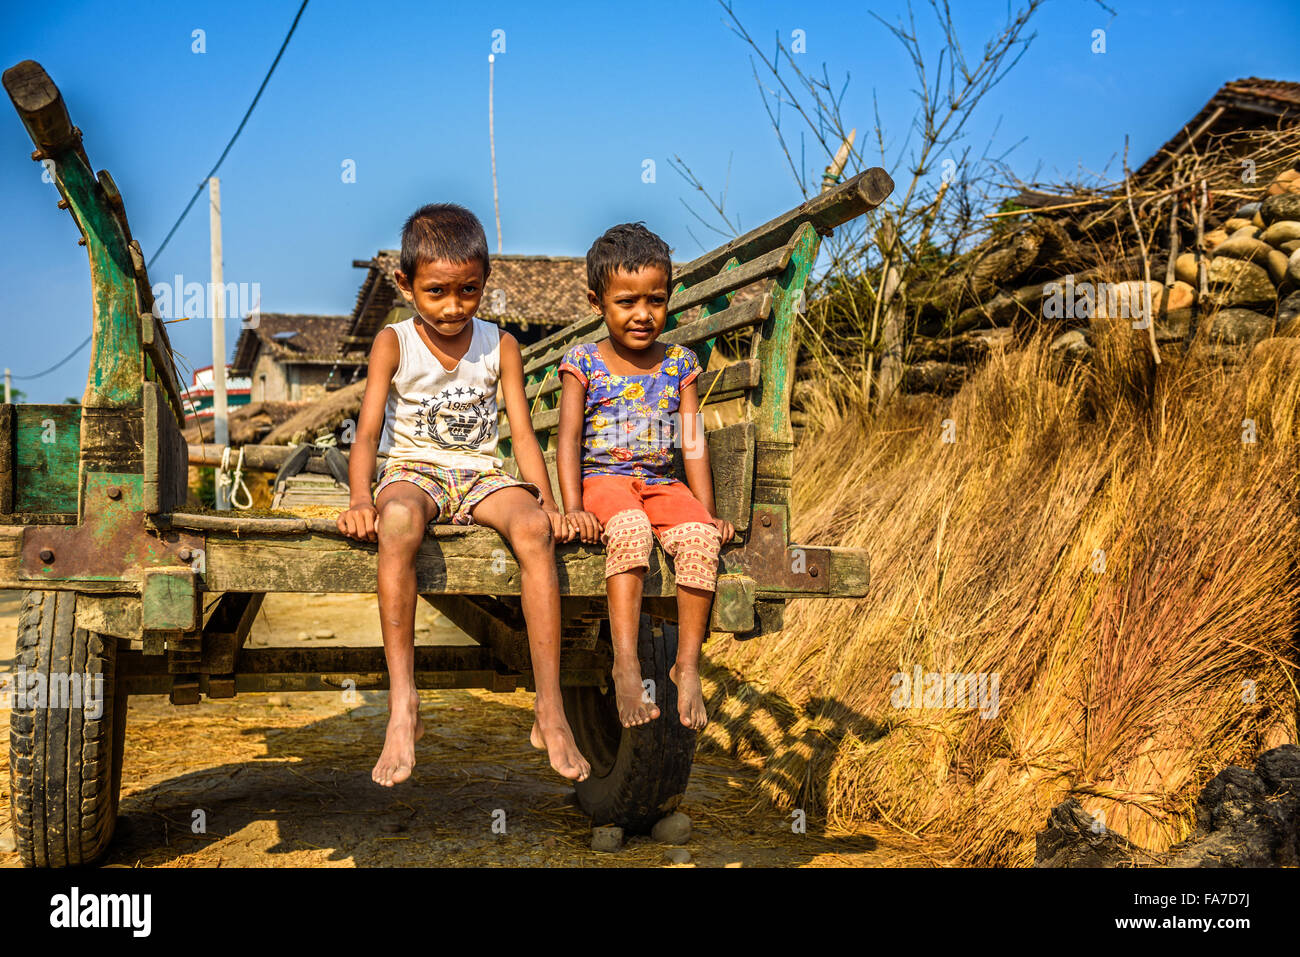 Two nepalese boys sitting on a wooden cart Stock Photo